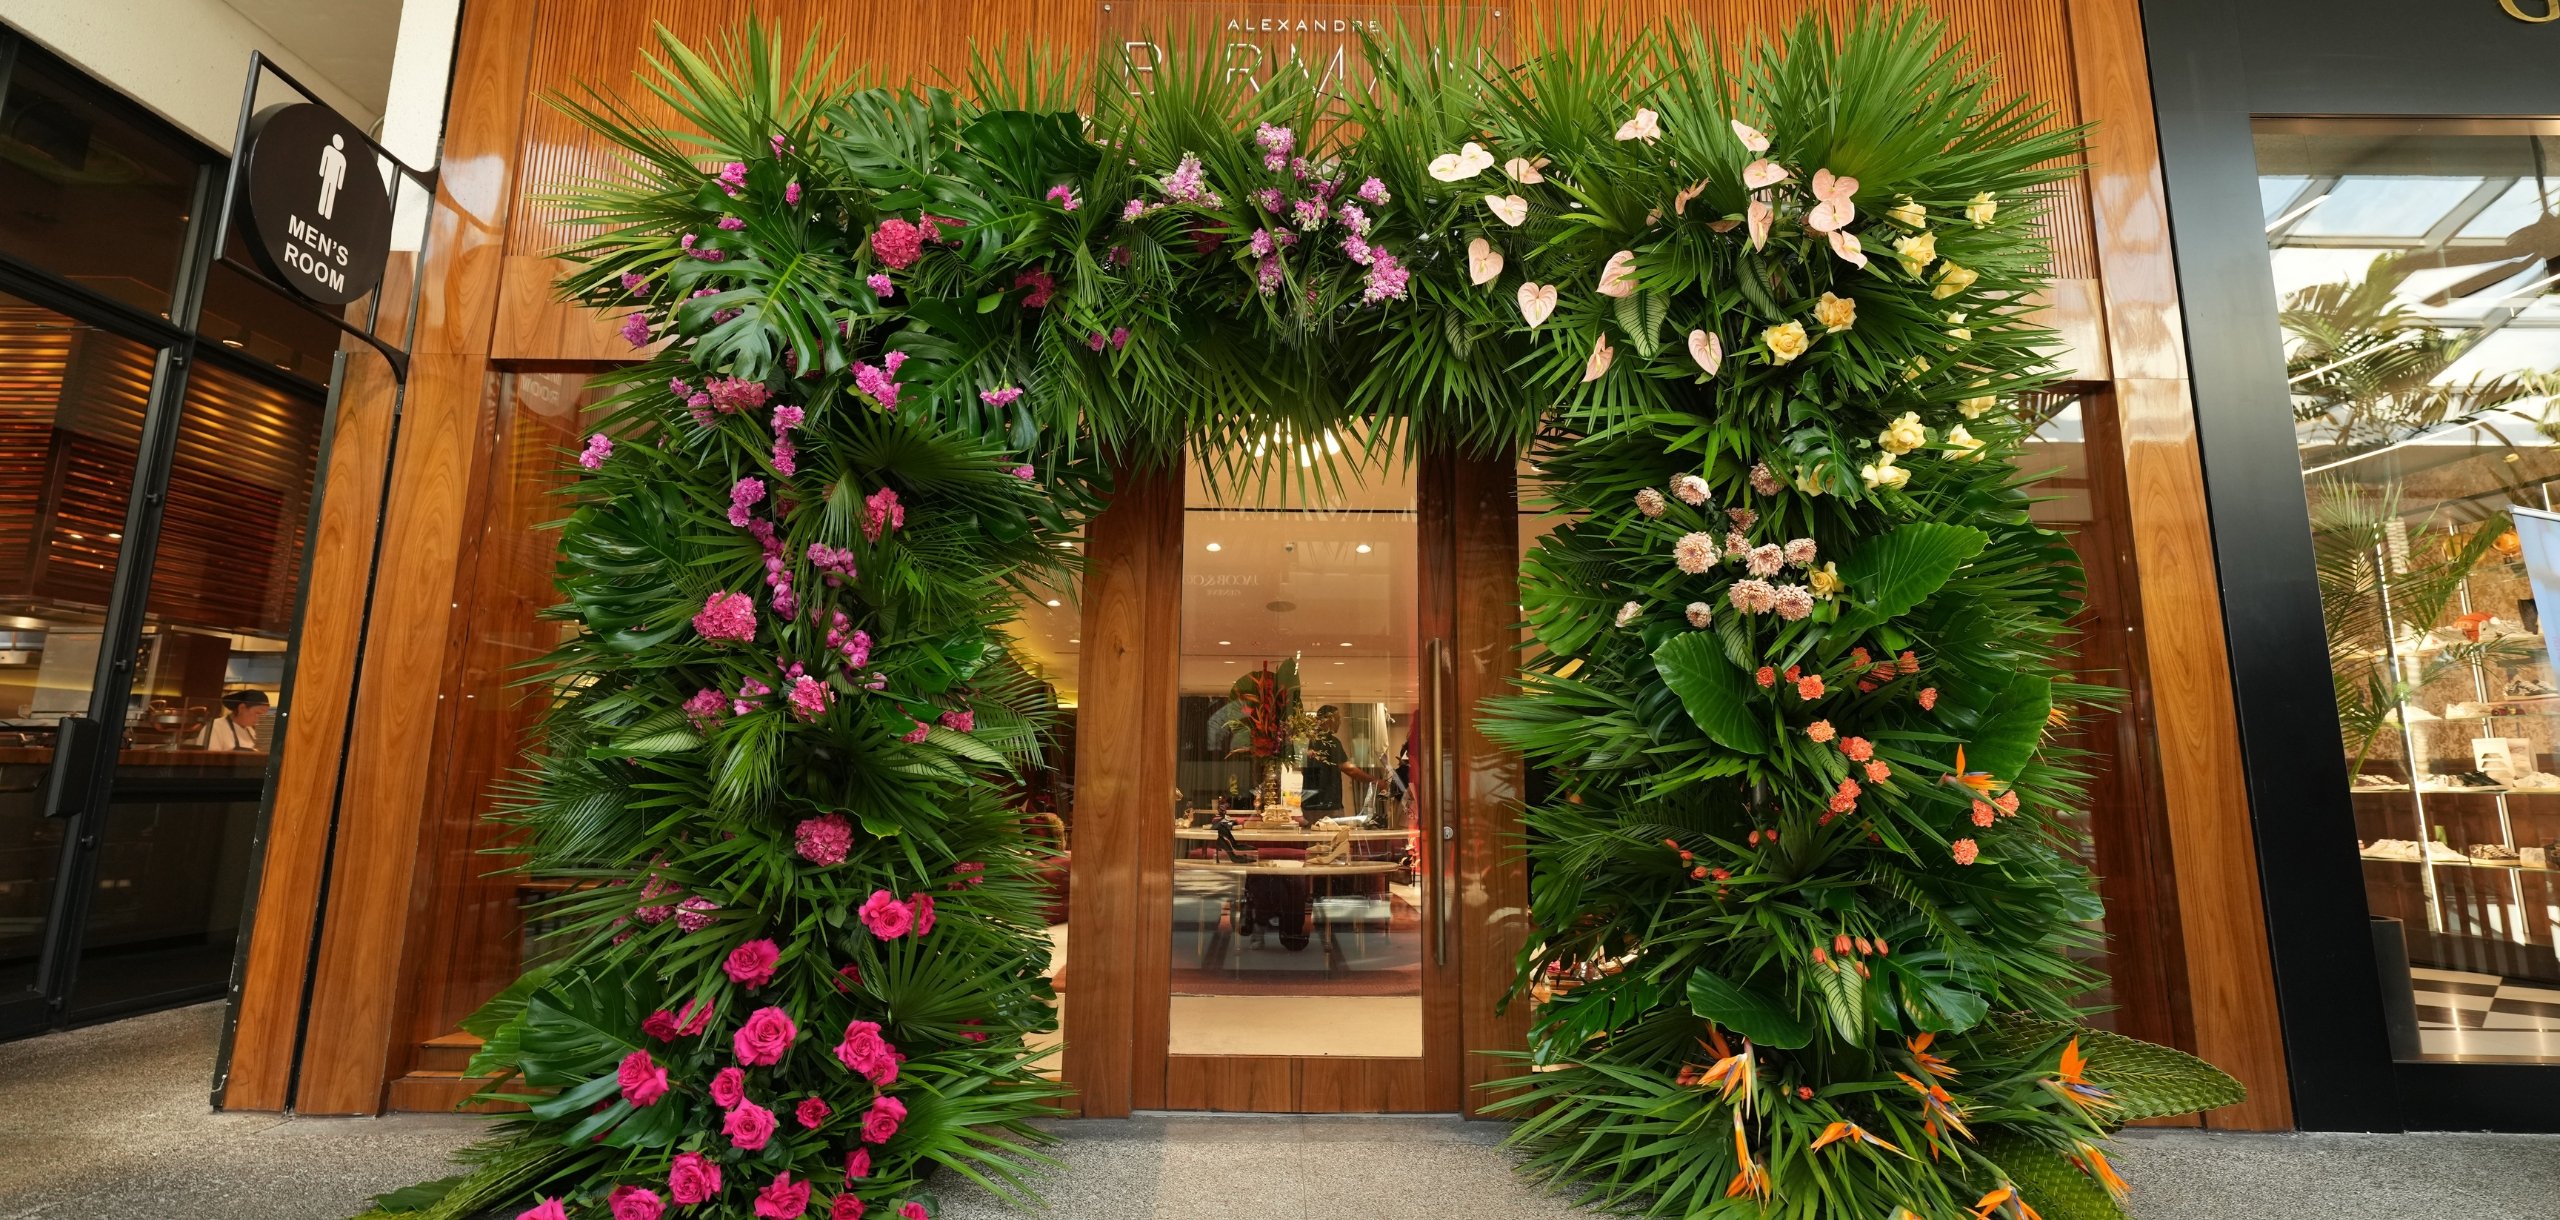 Entrance of the Alexandre Birman boutique adorned with a floral arch